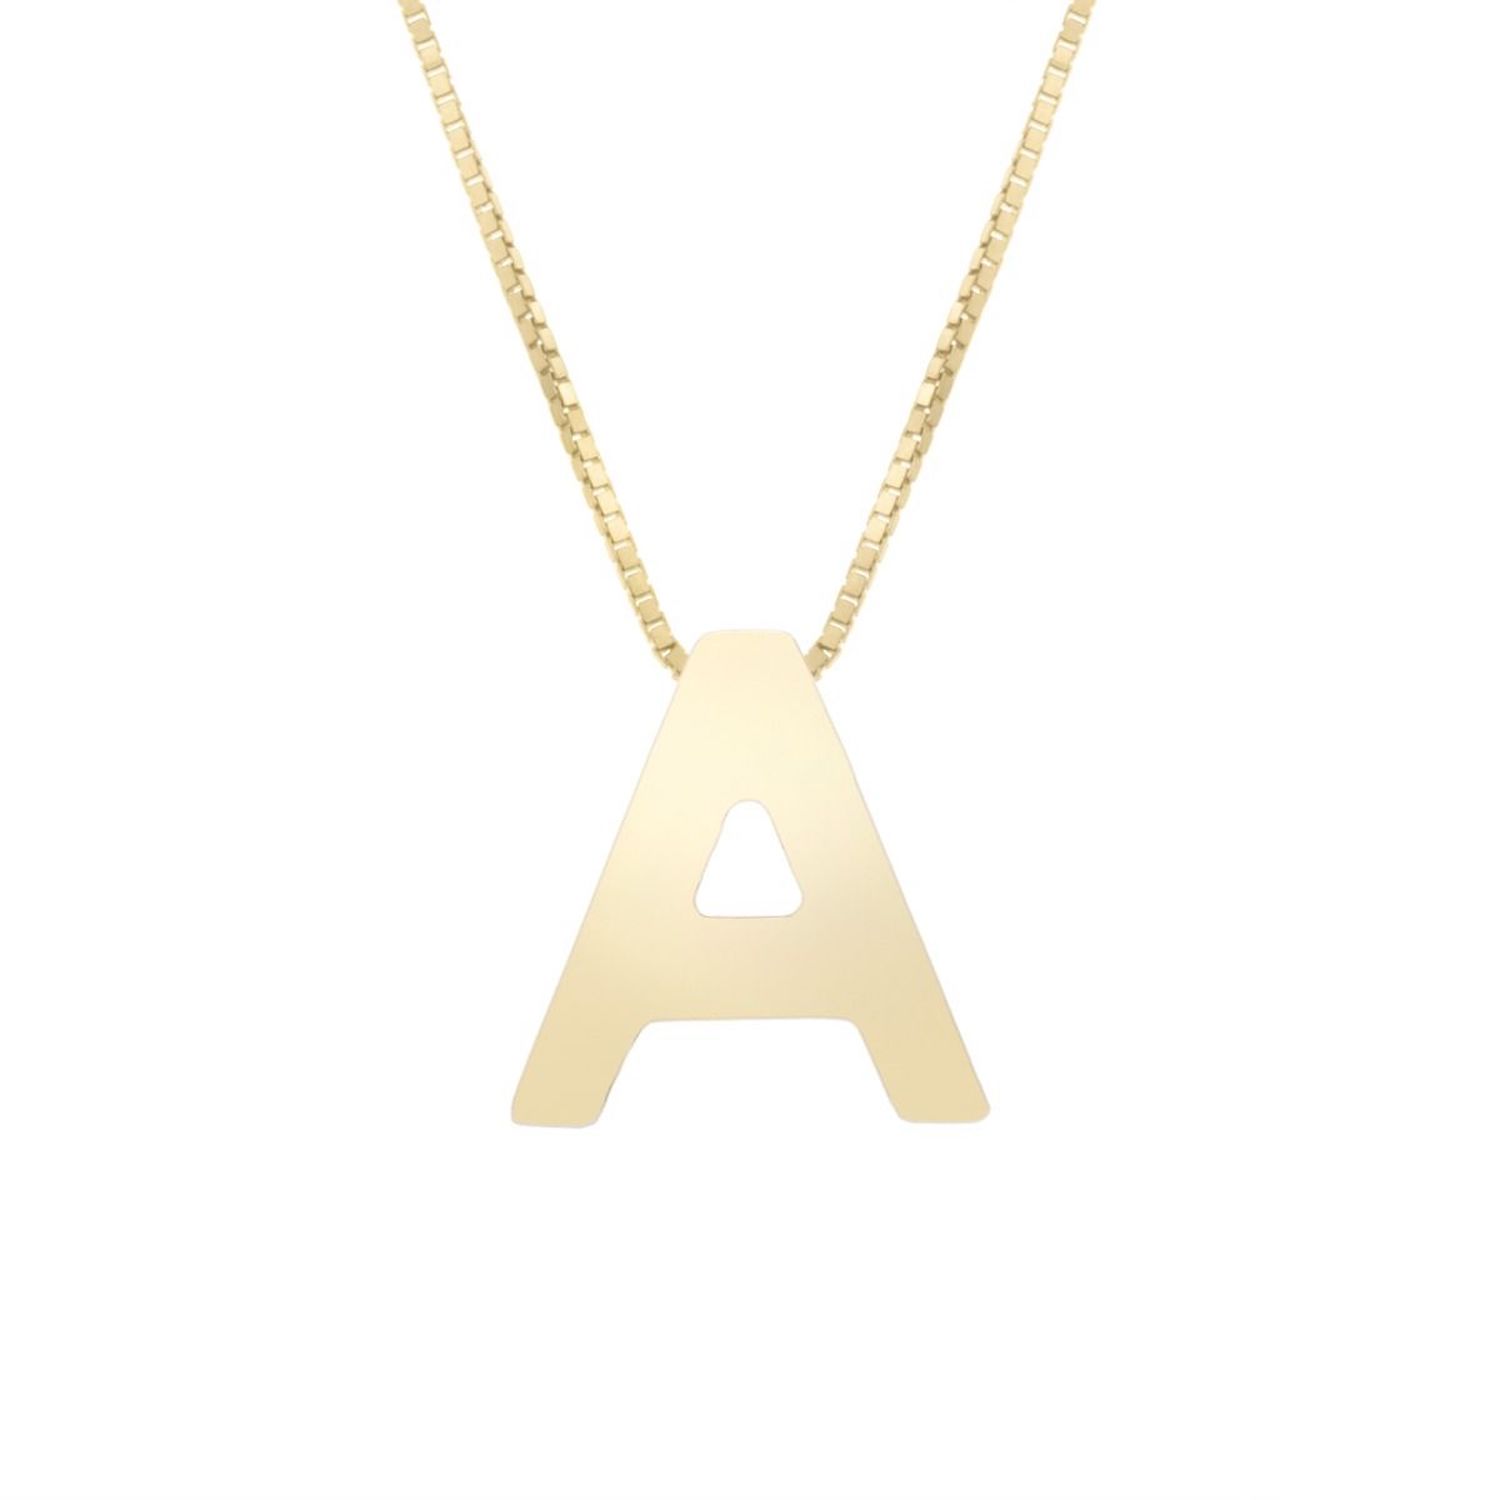 14K Yellow Gold Block Letter Initial Pendant Box Chain Necklace 16"-18" - A